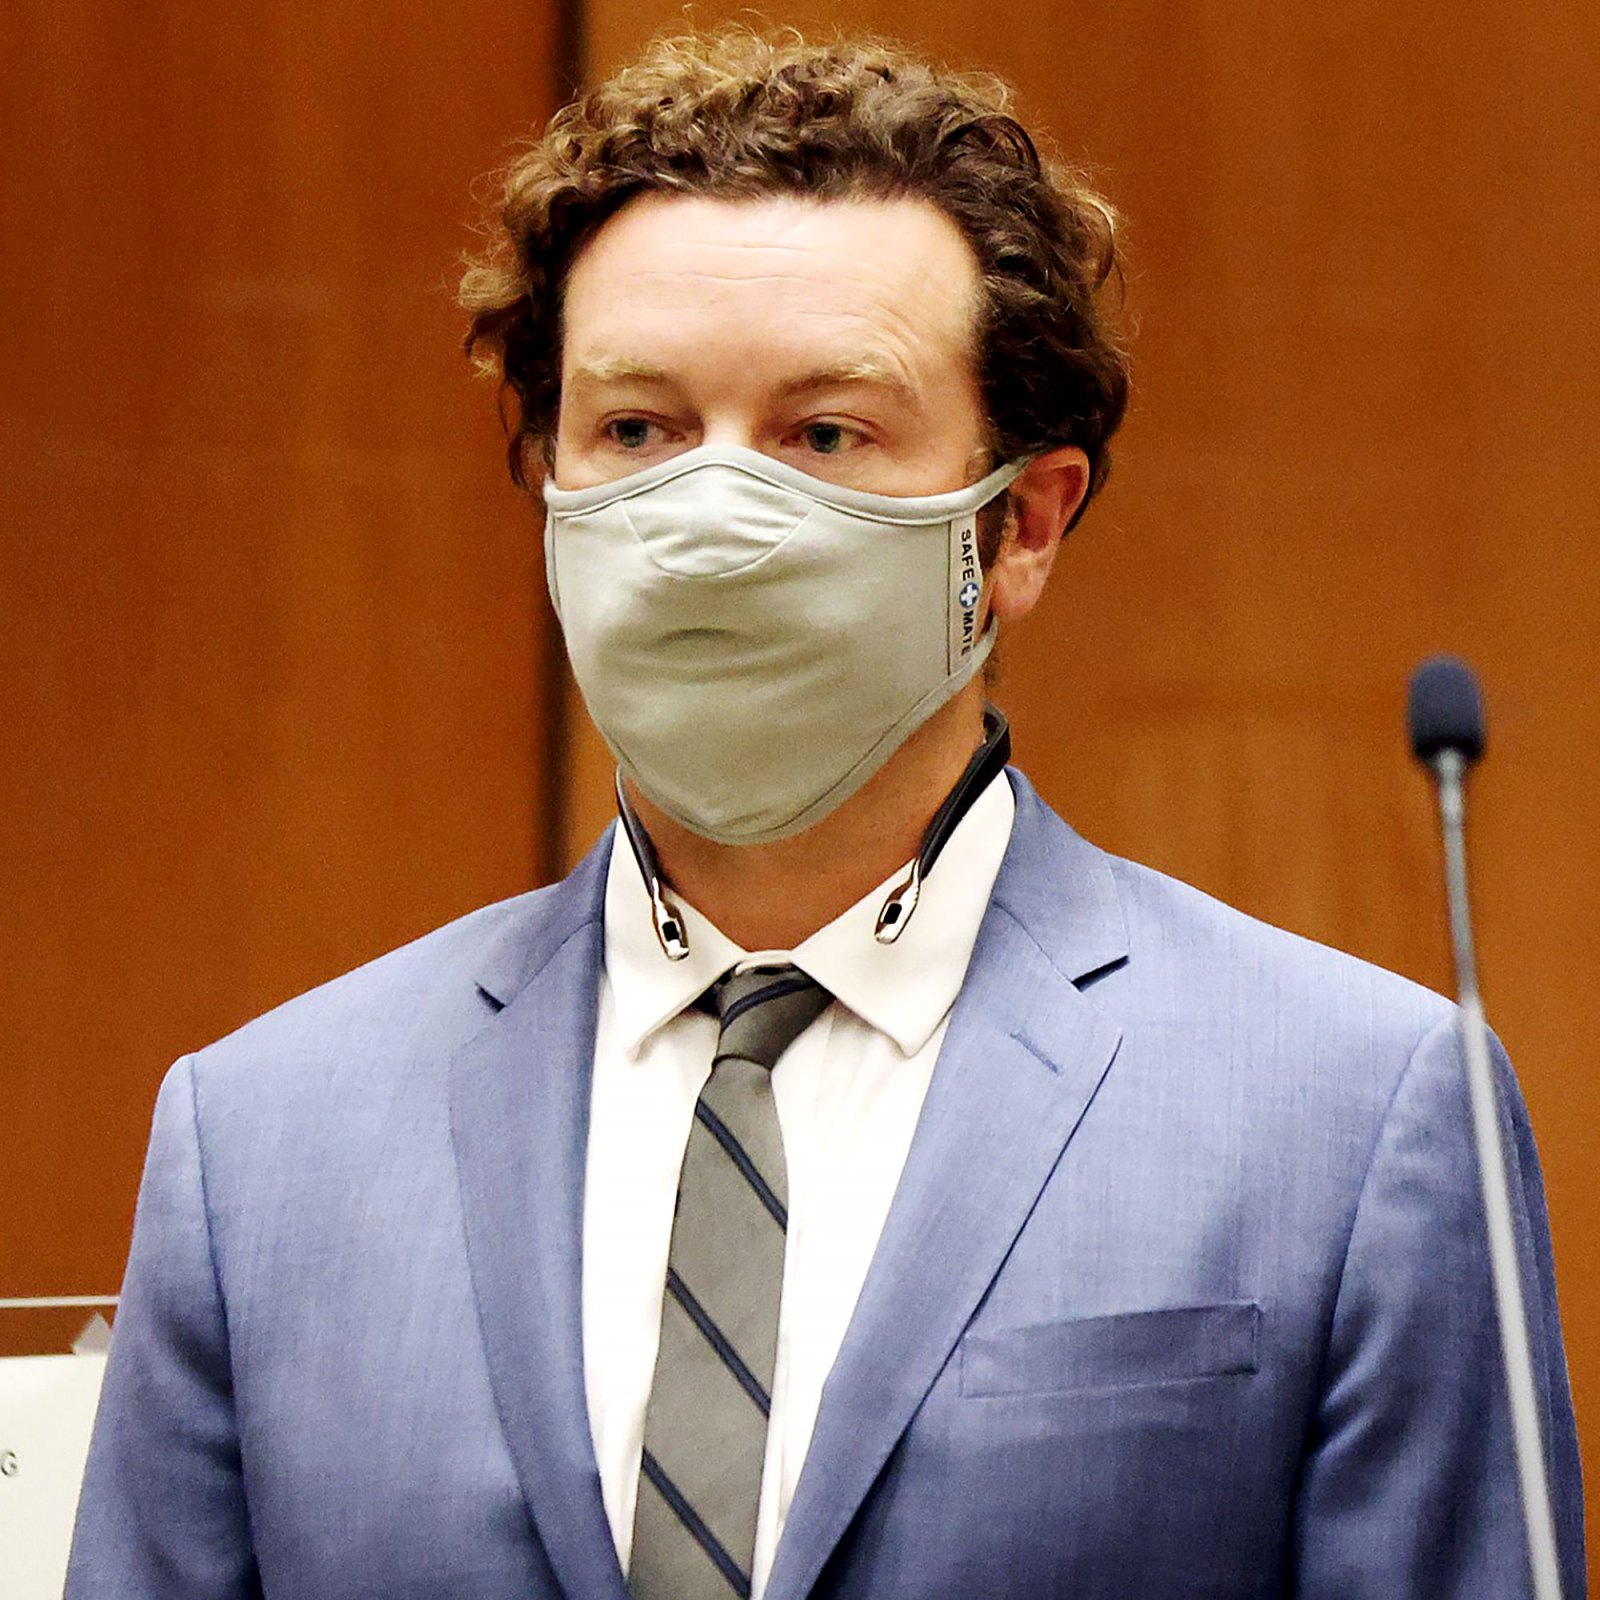 Danny Masterson Accused of Sexual Assault: Complete Guide to the Case, Trial